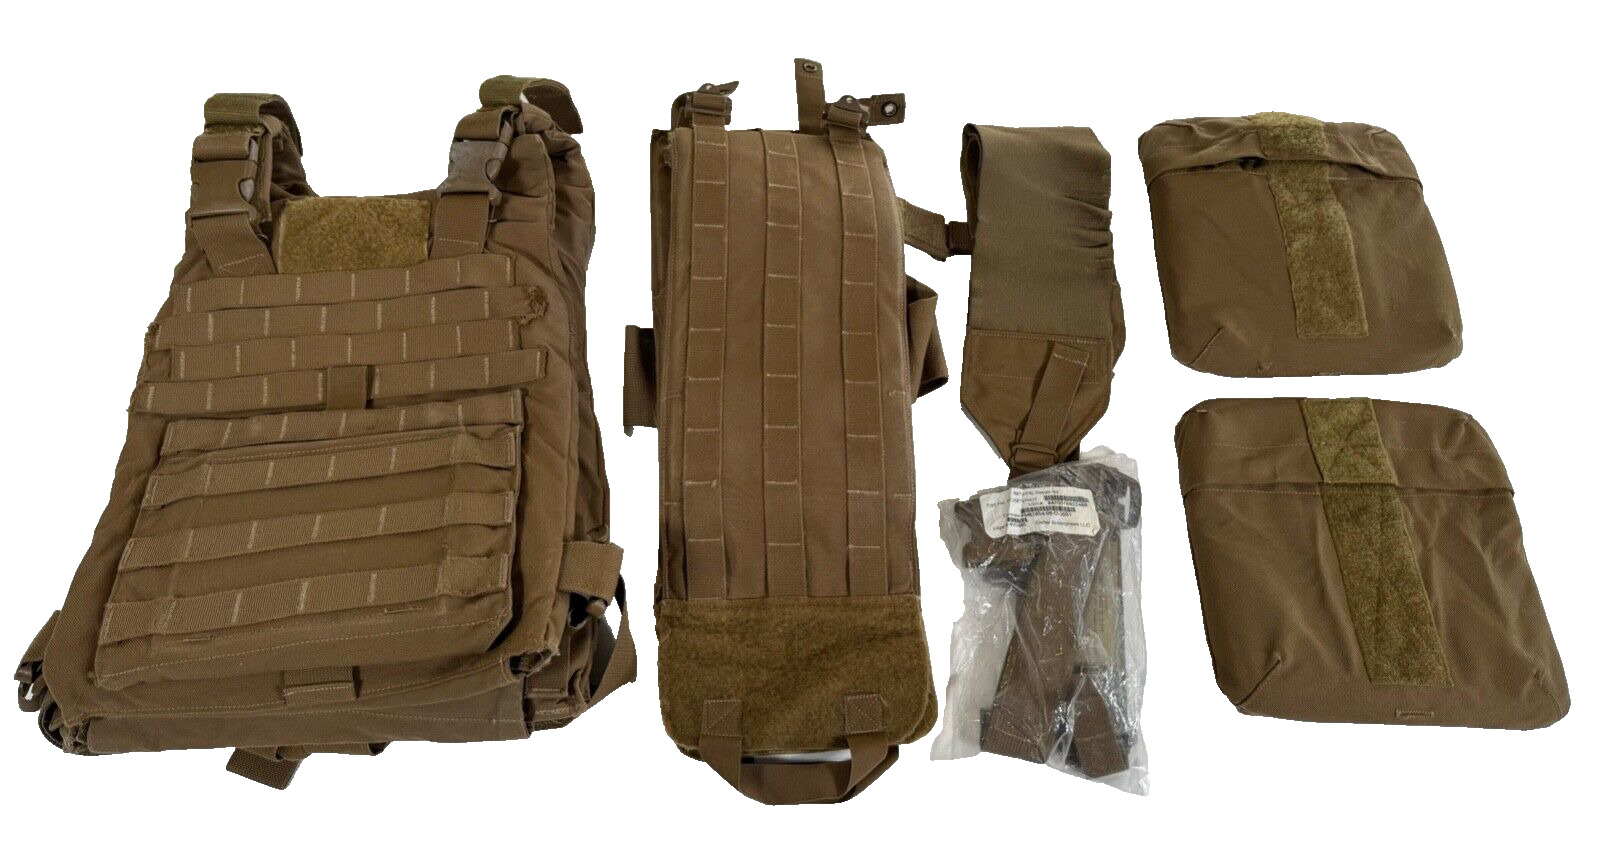 USMC Plate Carrier with Soft Inserts & Side Plate Pockets Coyote Size Medium